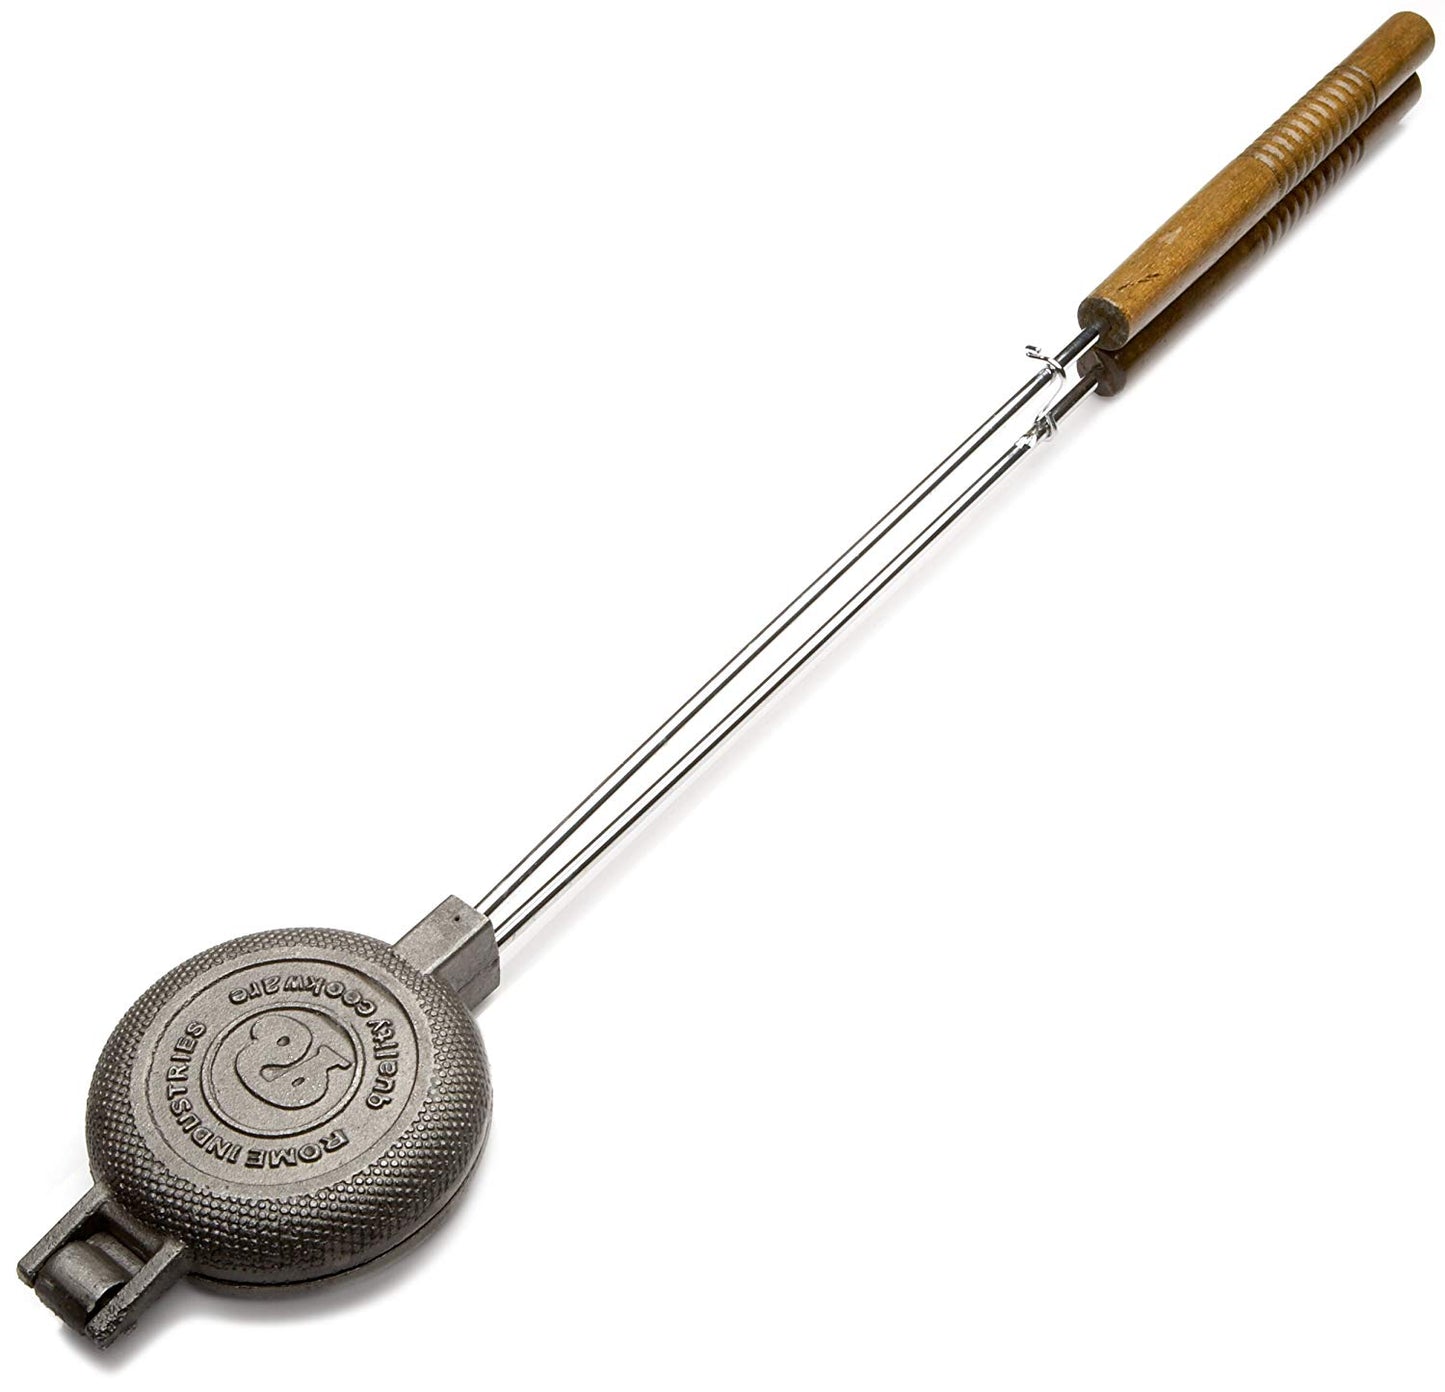 Rome's 1805 Round Pie Iron with Steel and Wood Handles